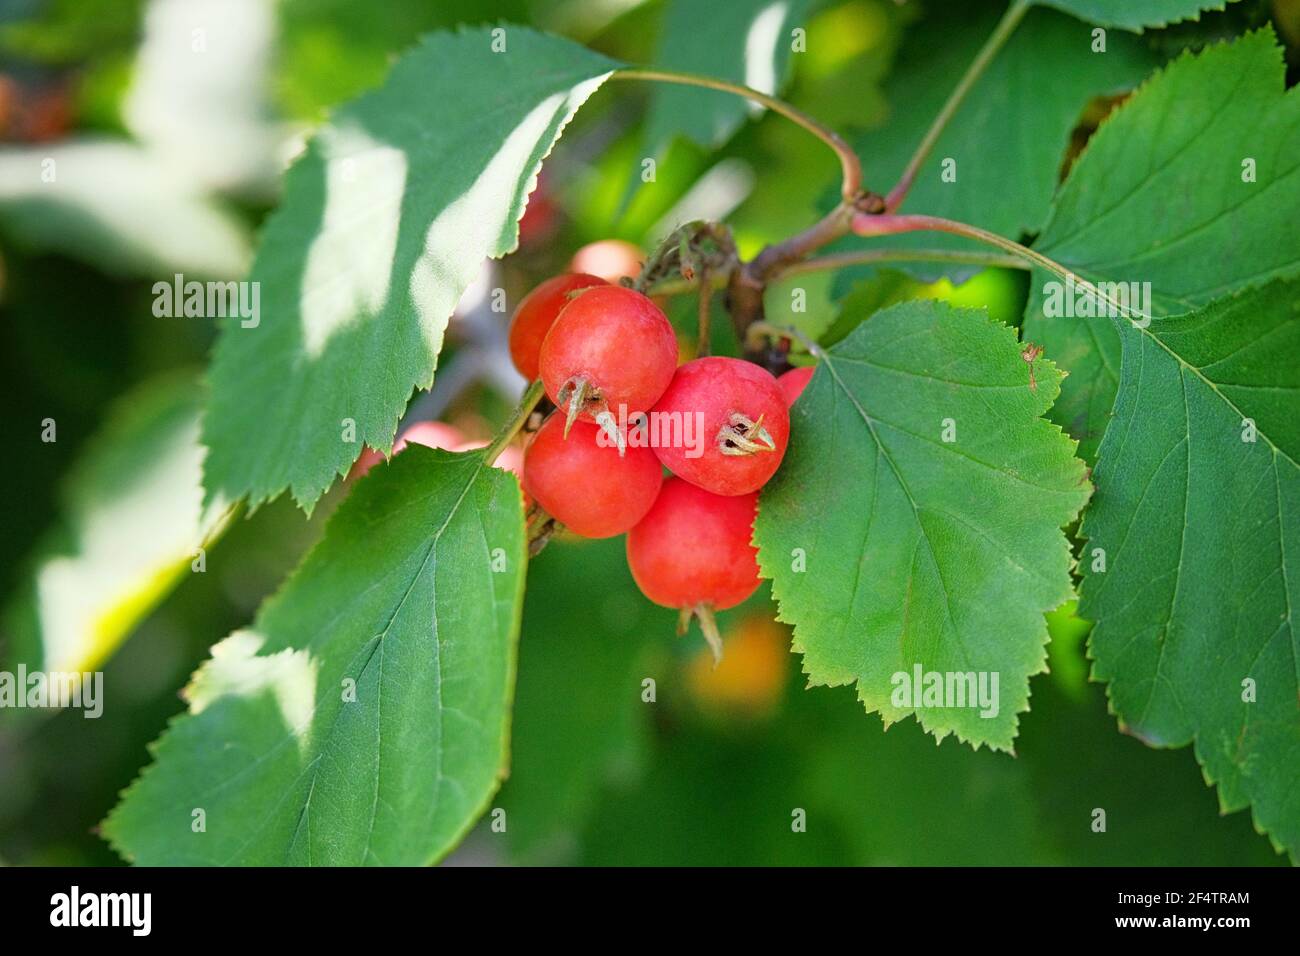 Many small red paradise apples hanging on a tree in garden. Fruit farming concept. Stock Photo